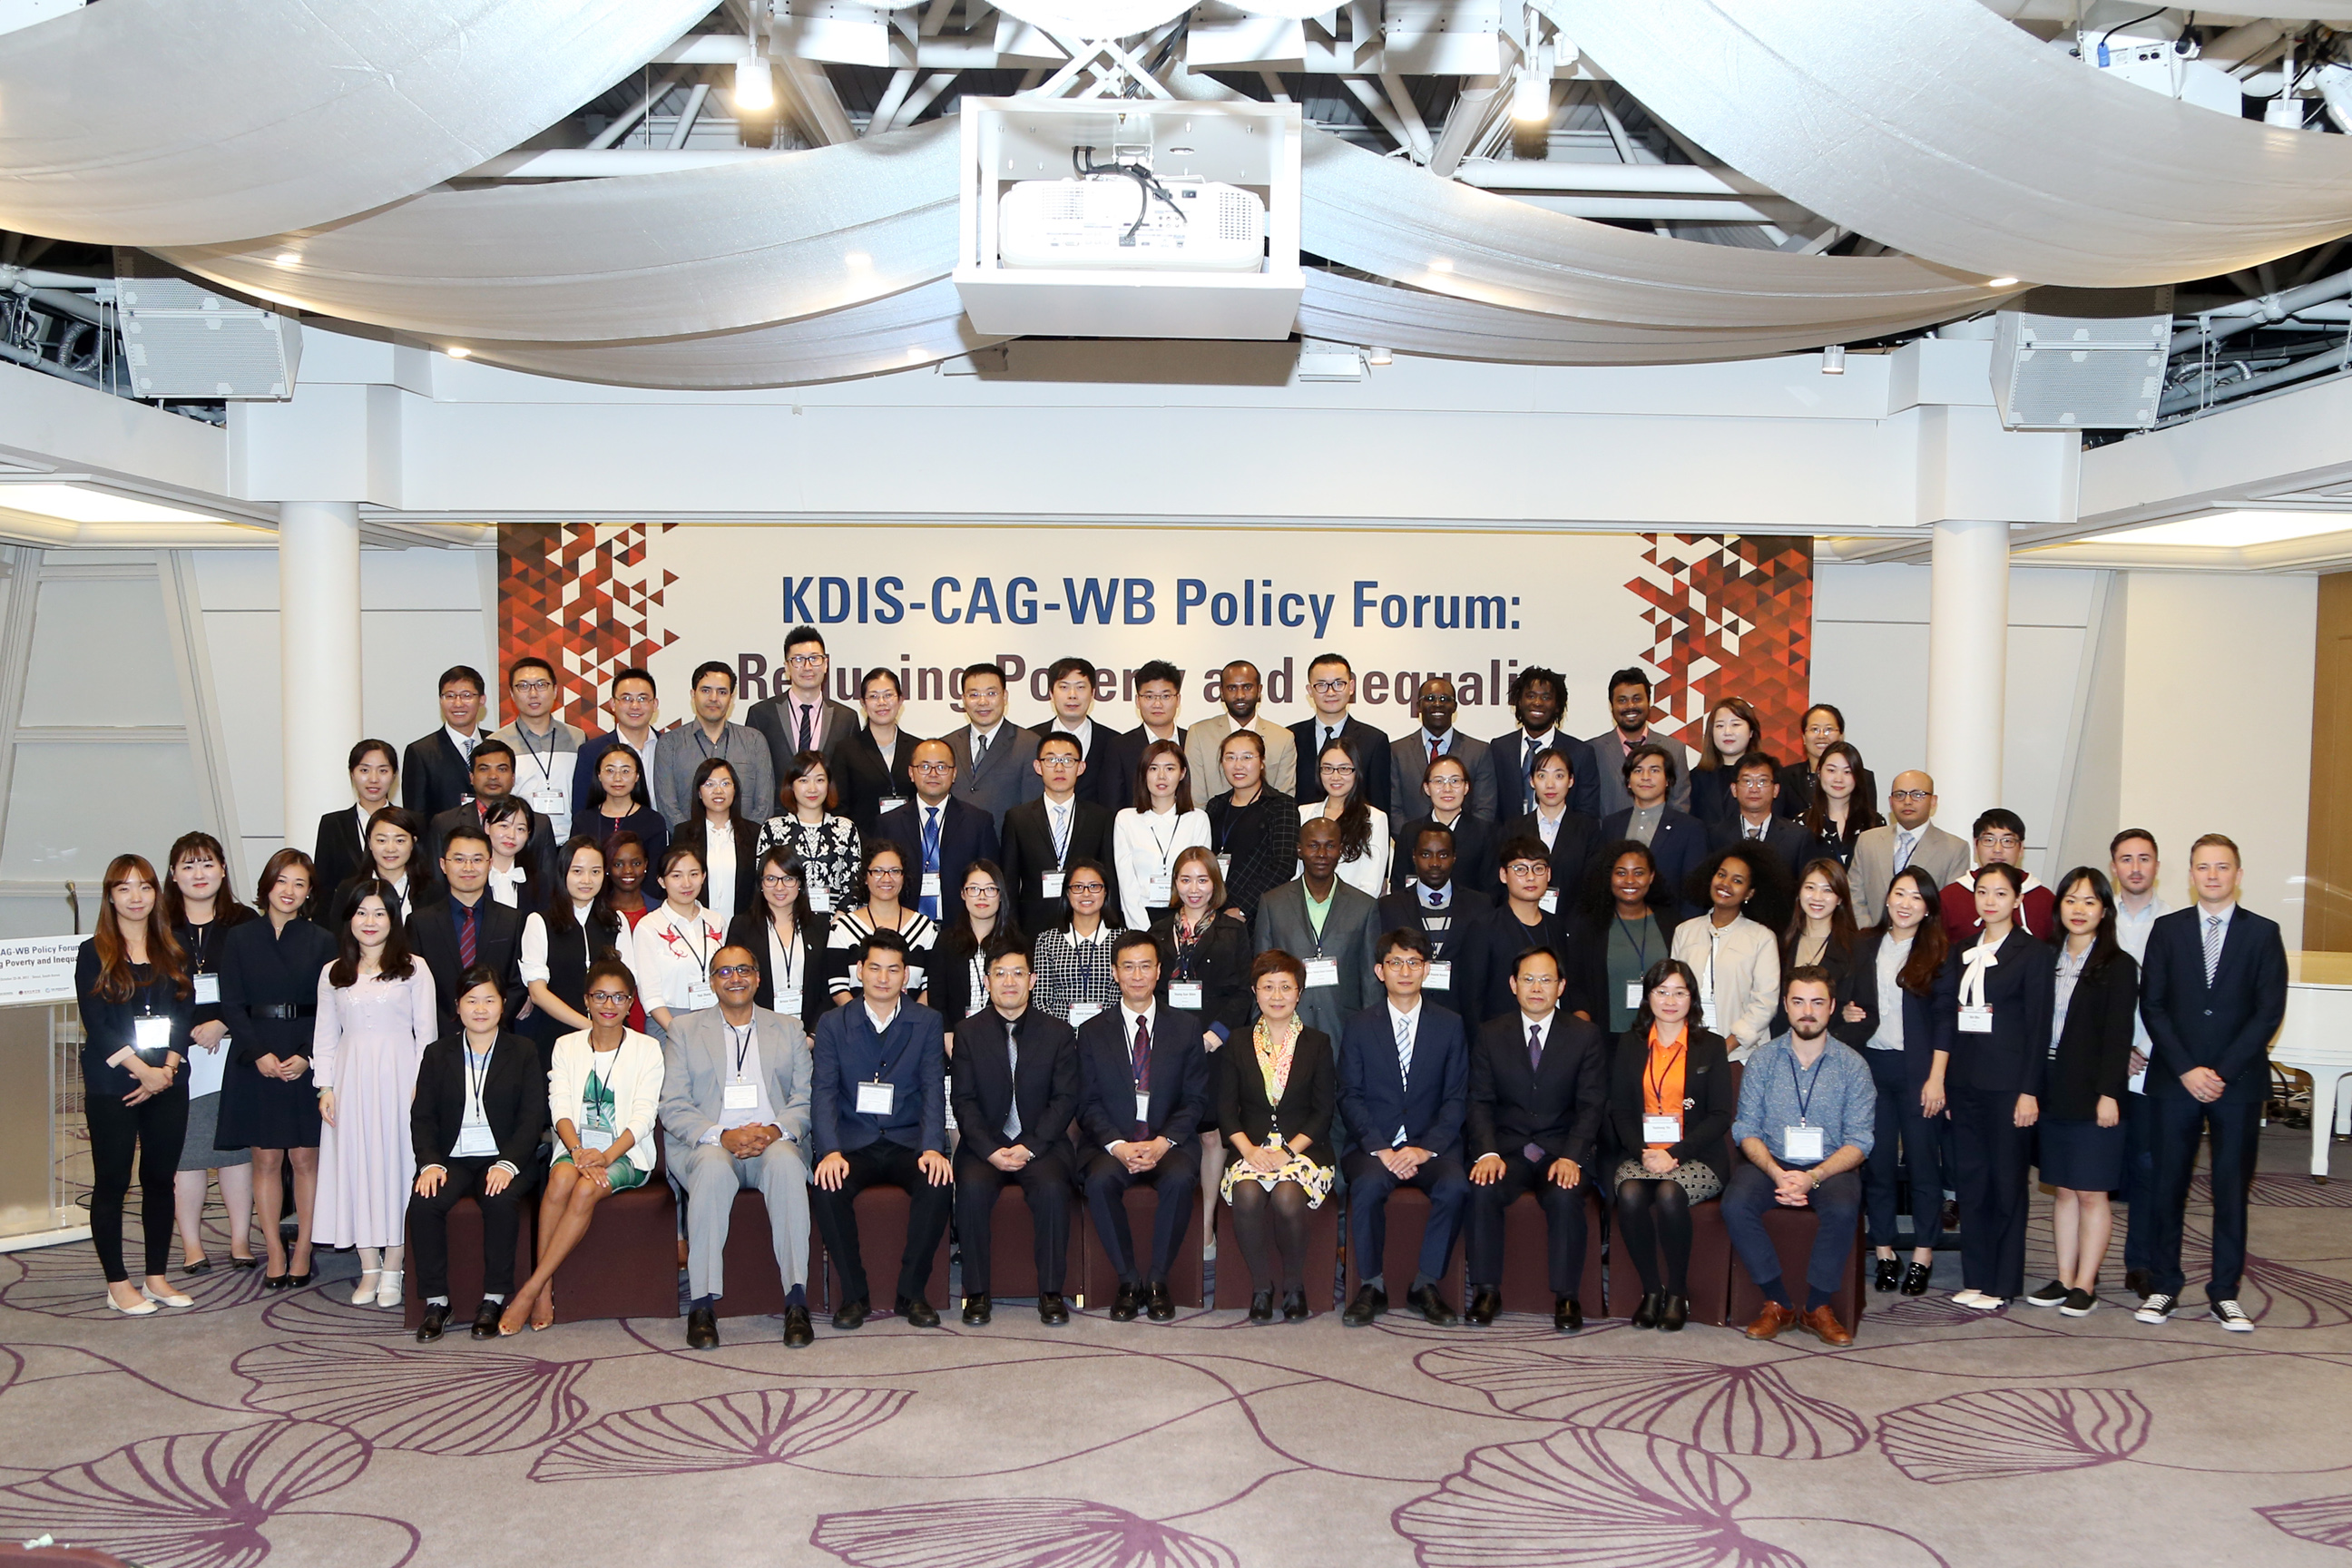 KDI School-World Bank-Chinese Academy of Governance Policy Forum